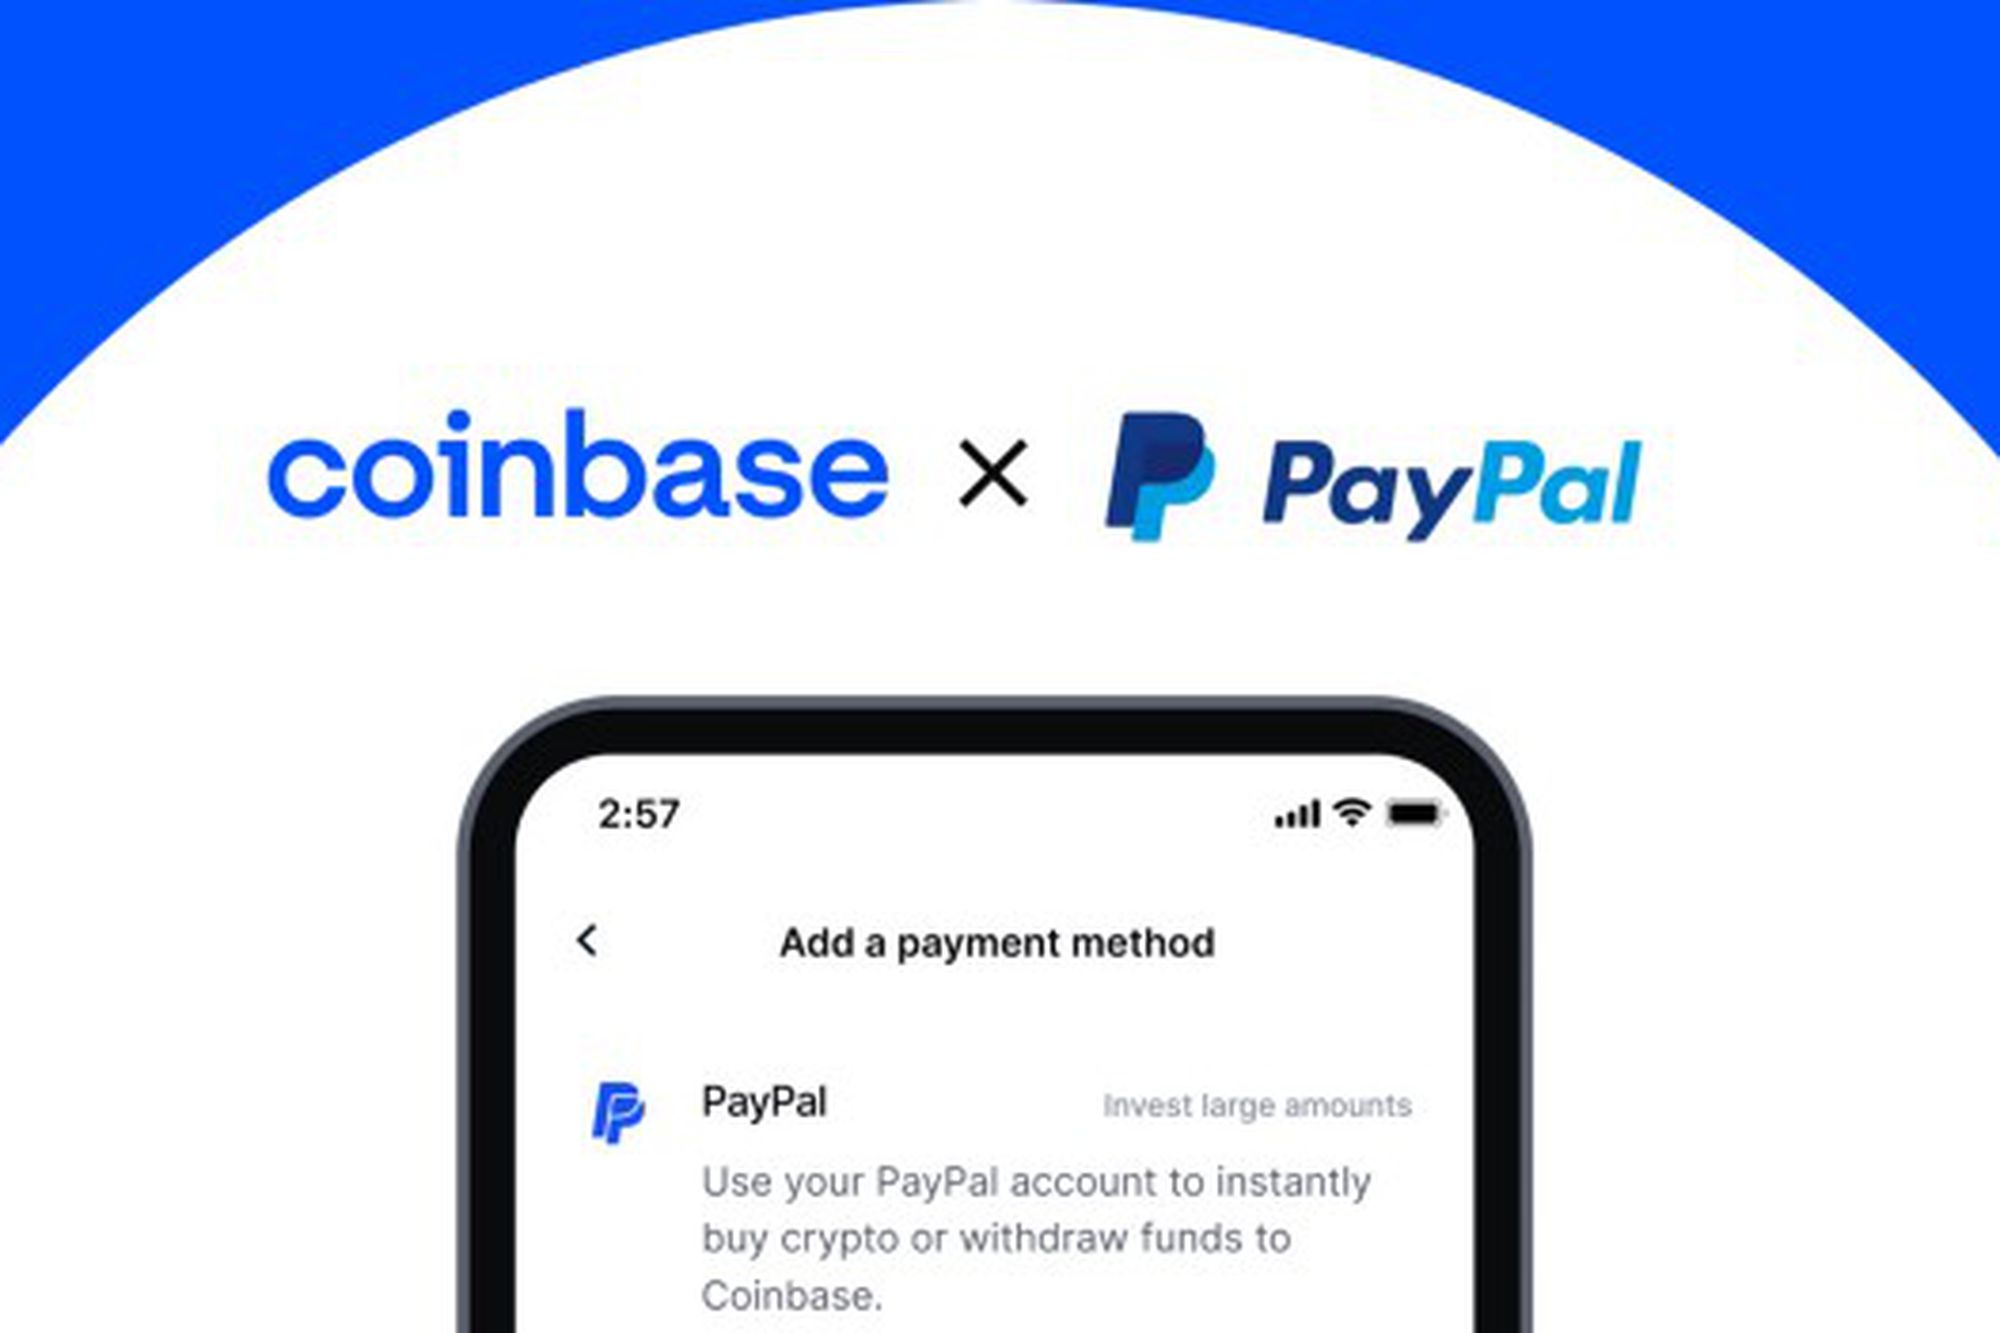 Coinbase Exchange Review - Everything you need to know before starting